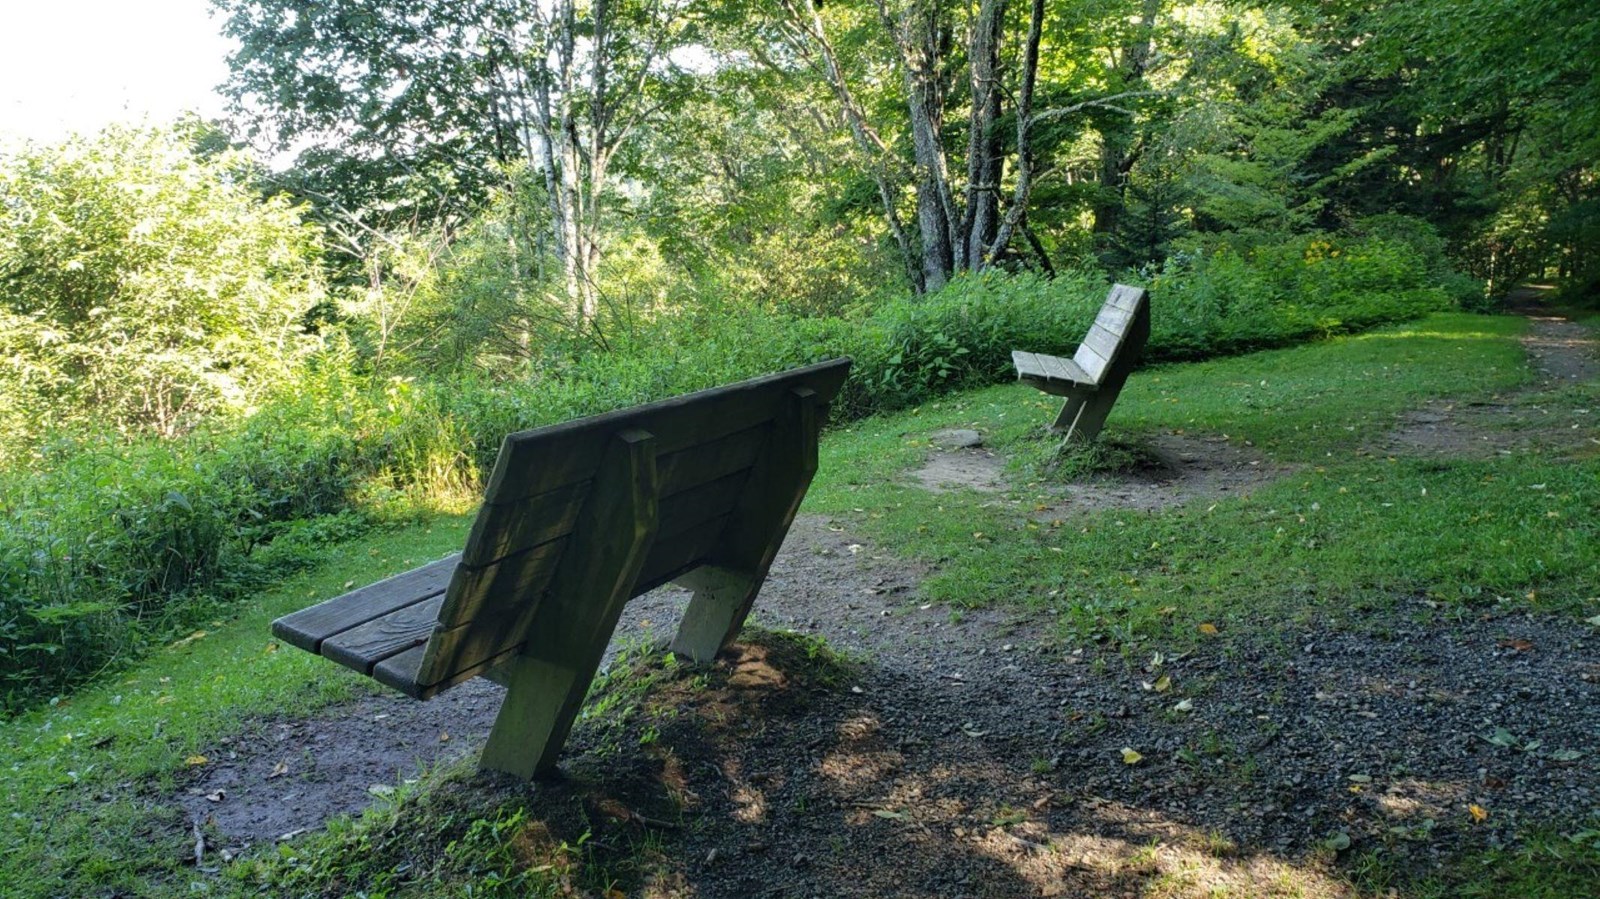 Two wooden benches face out to a viewing area